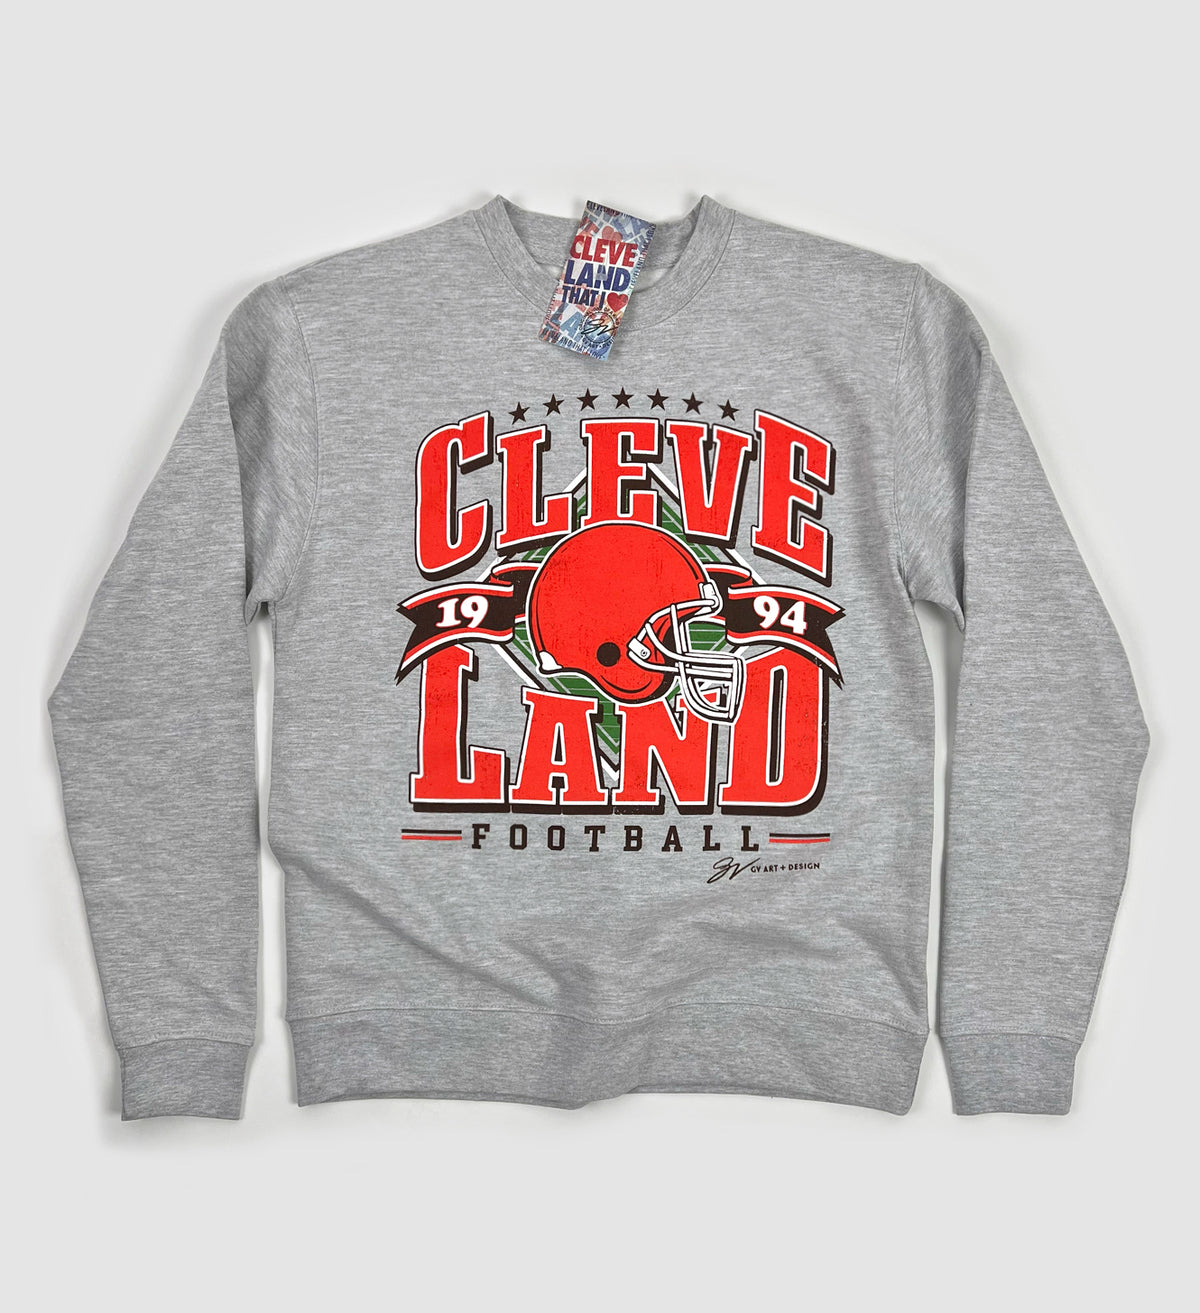 GV Art Cleveland Footbal Small Shirt - Browns colors Guardians Of